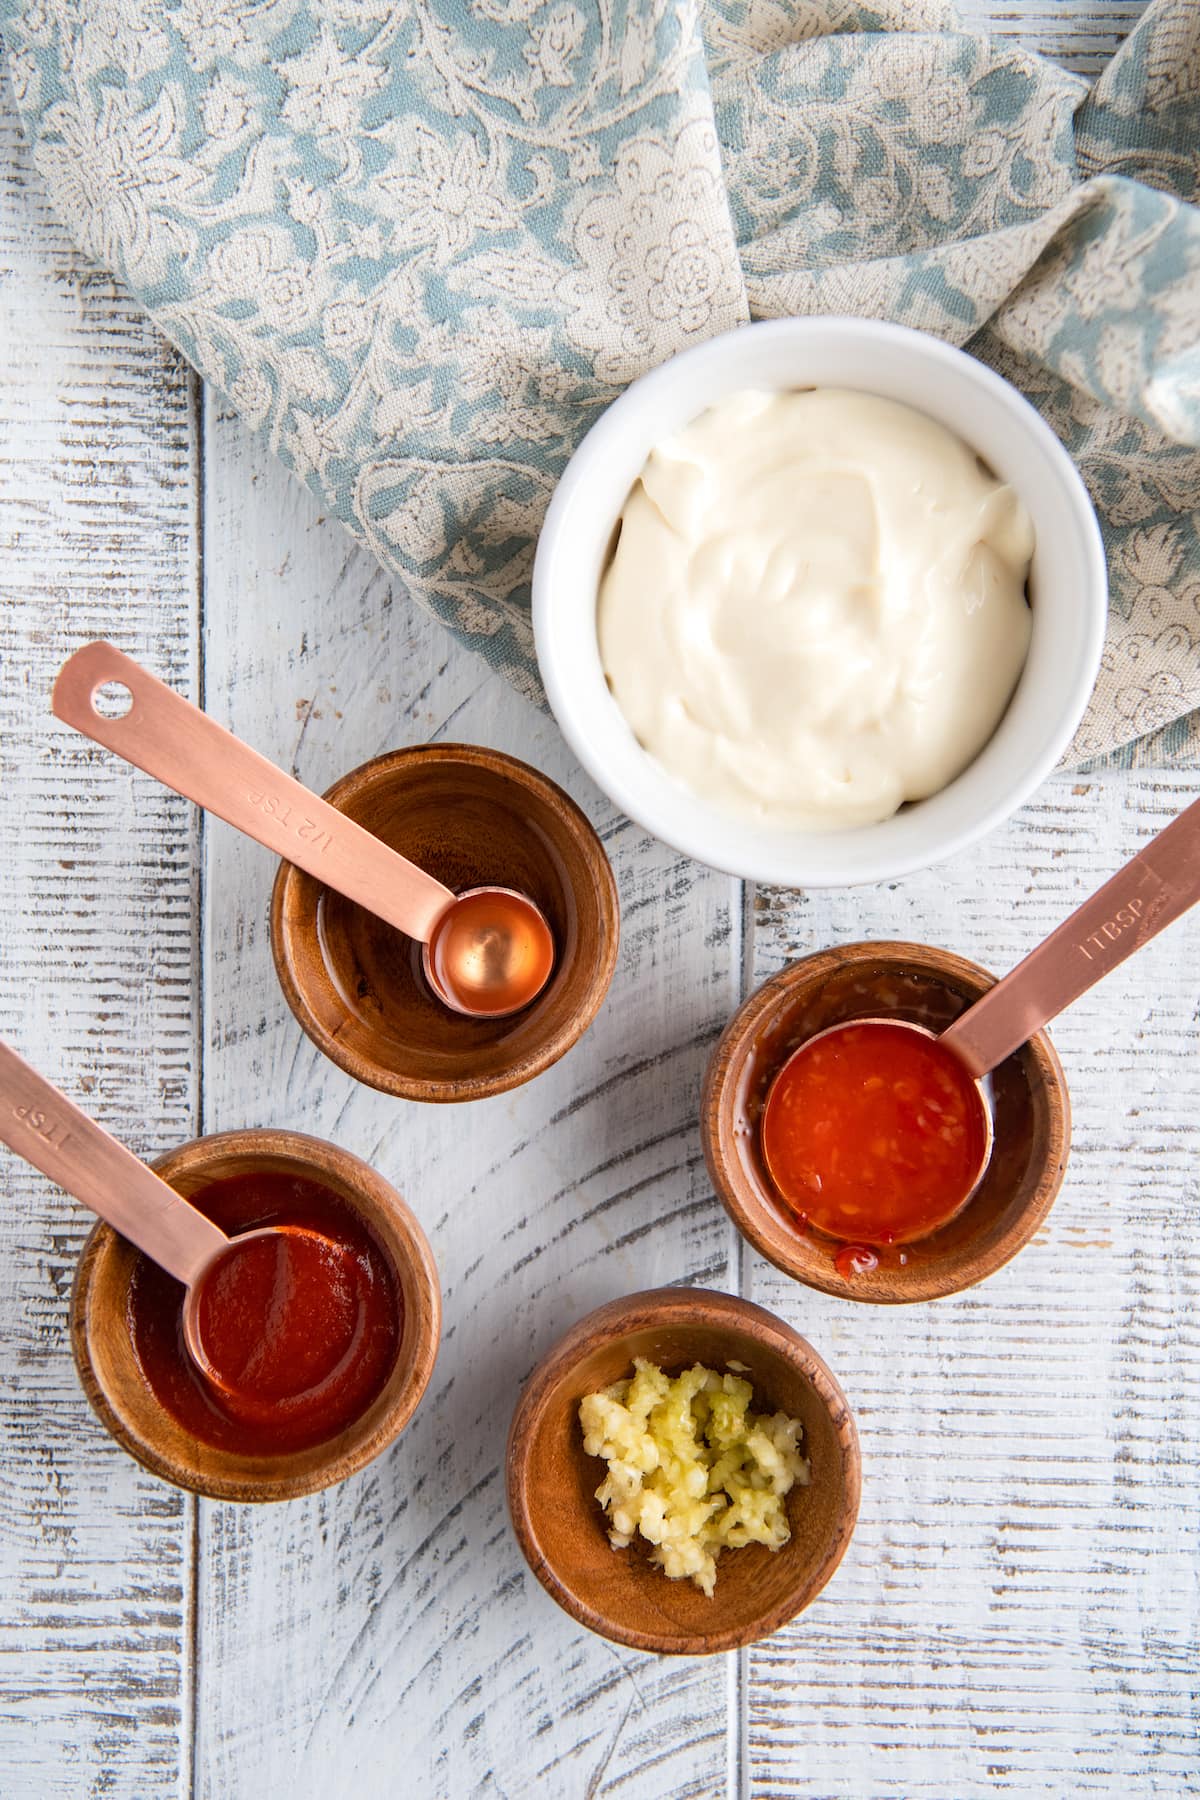 Ingredients for homemade sauce in wooden bowls on a white background.